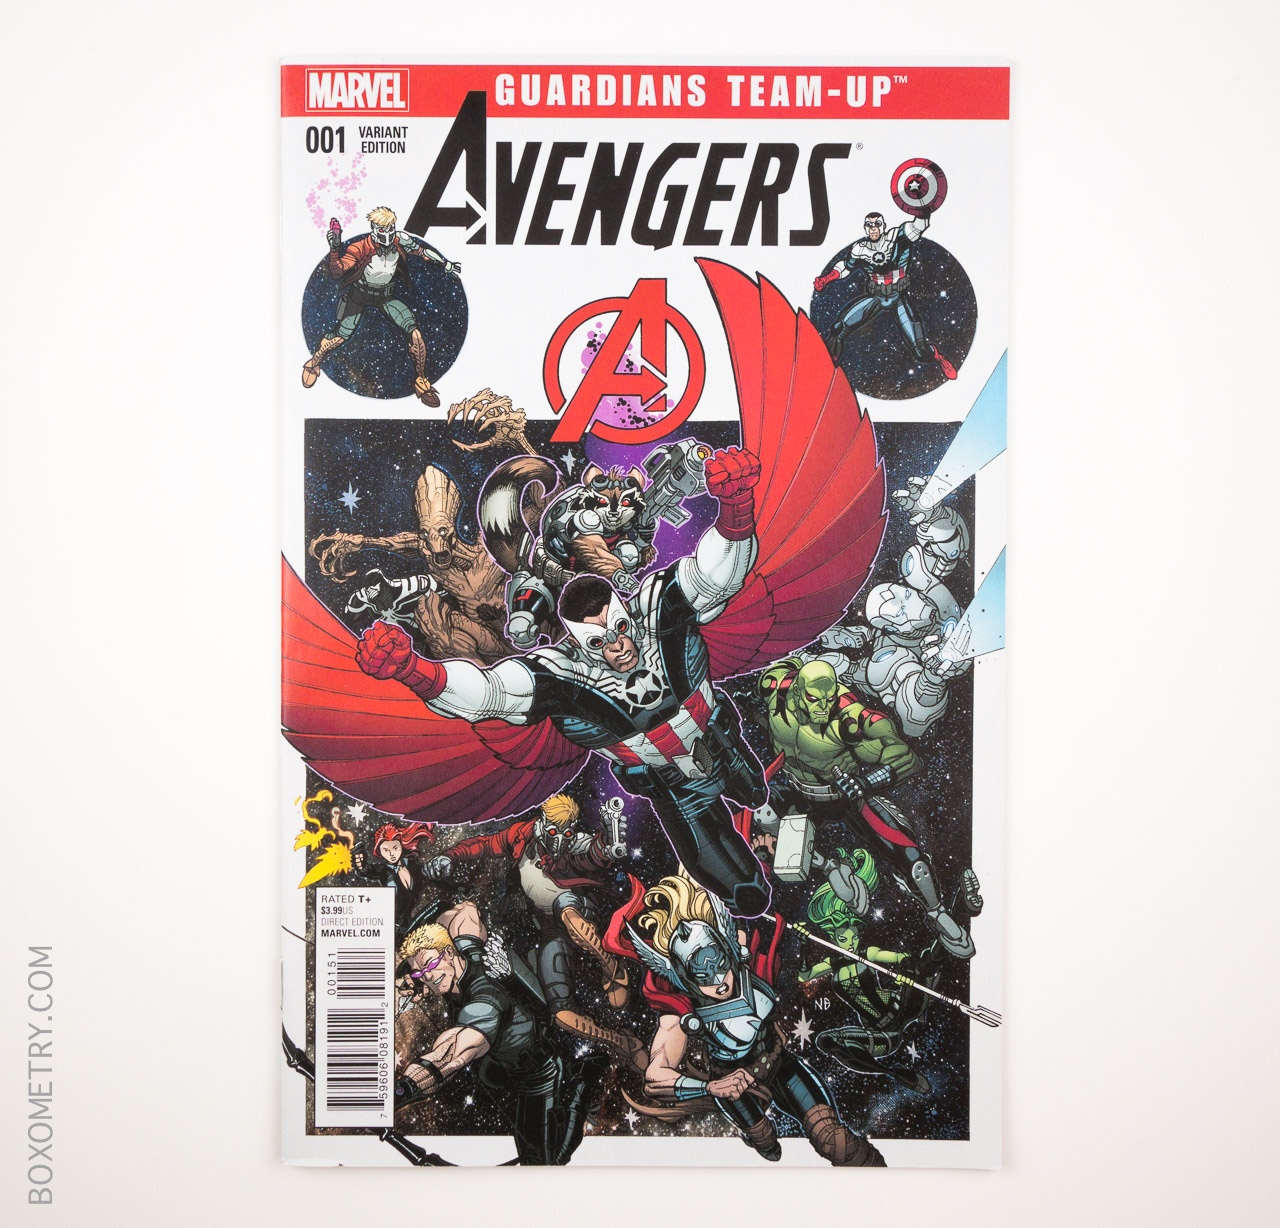 April 2015 Marvel Collector Corps Avengers Guardians Team-Up 001 Comic